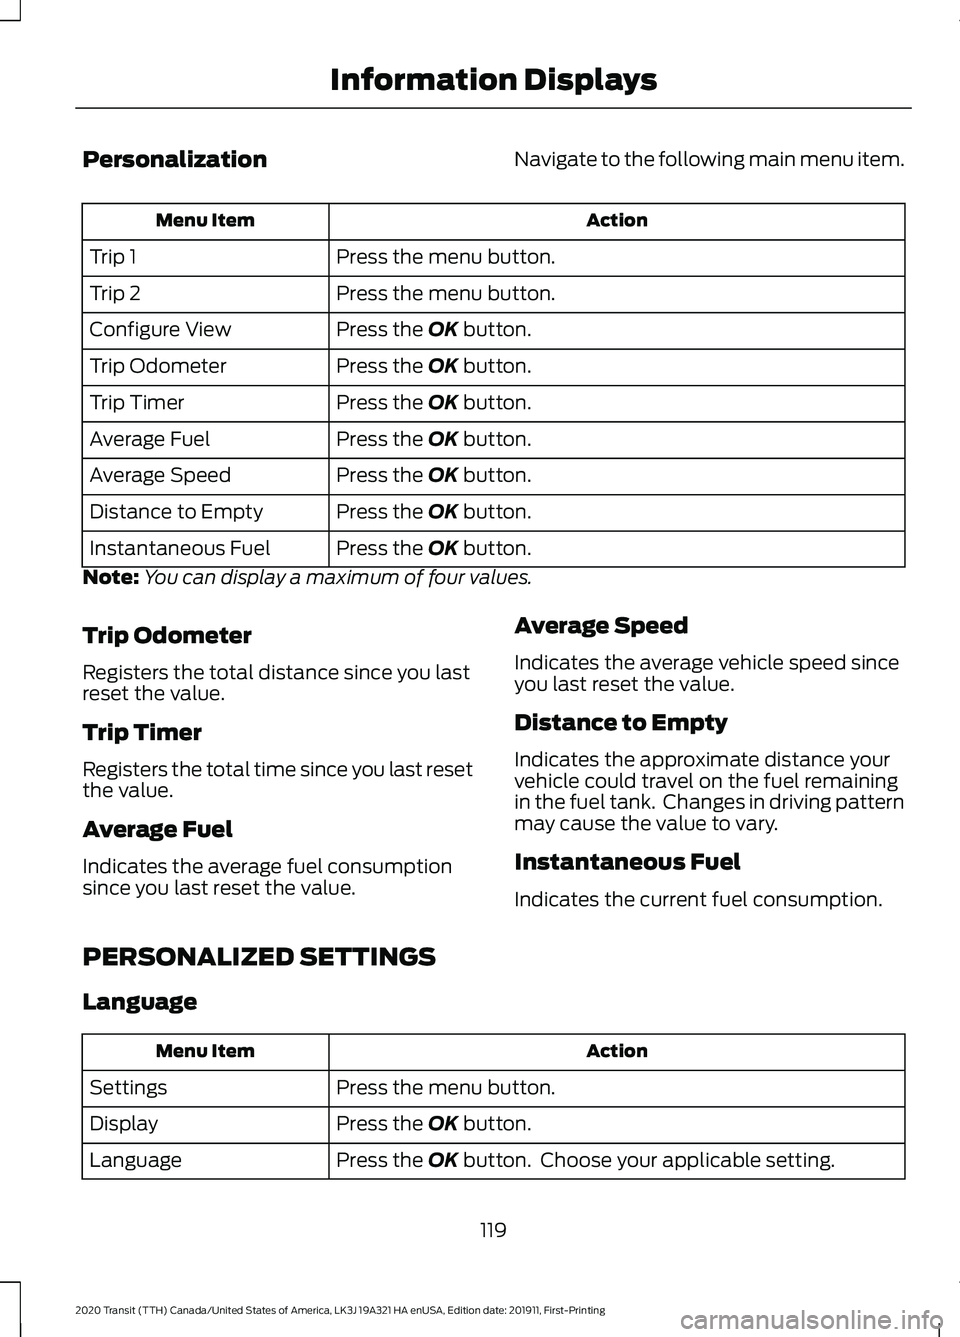 FORD TRANSIT 2020  Owners Manual Personalization
Navigate to the following main menu item. Action
Menu Item
Press the menu button.
Trip 1
Press the menu button.
Trip 2
Press the OK button.
Configure View
Press the 
OK button.
Trip Od